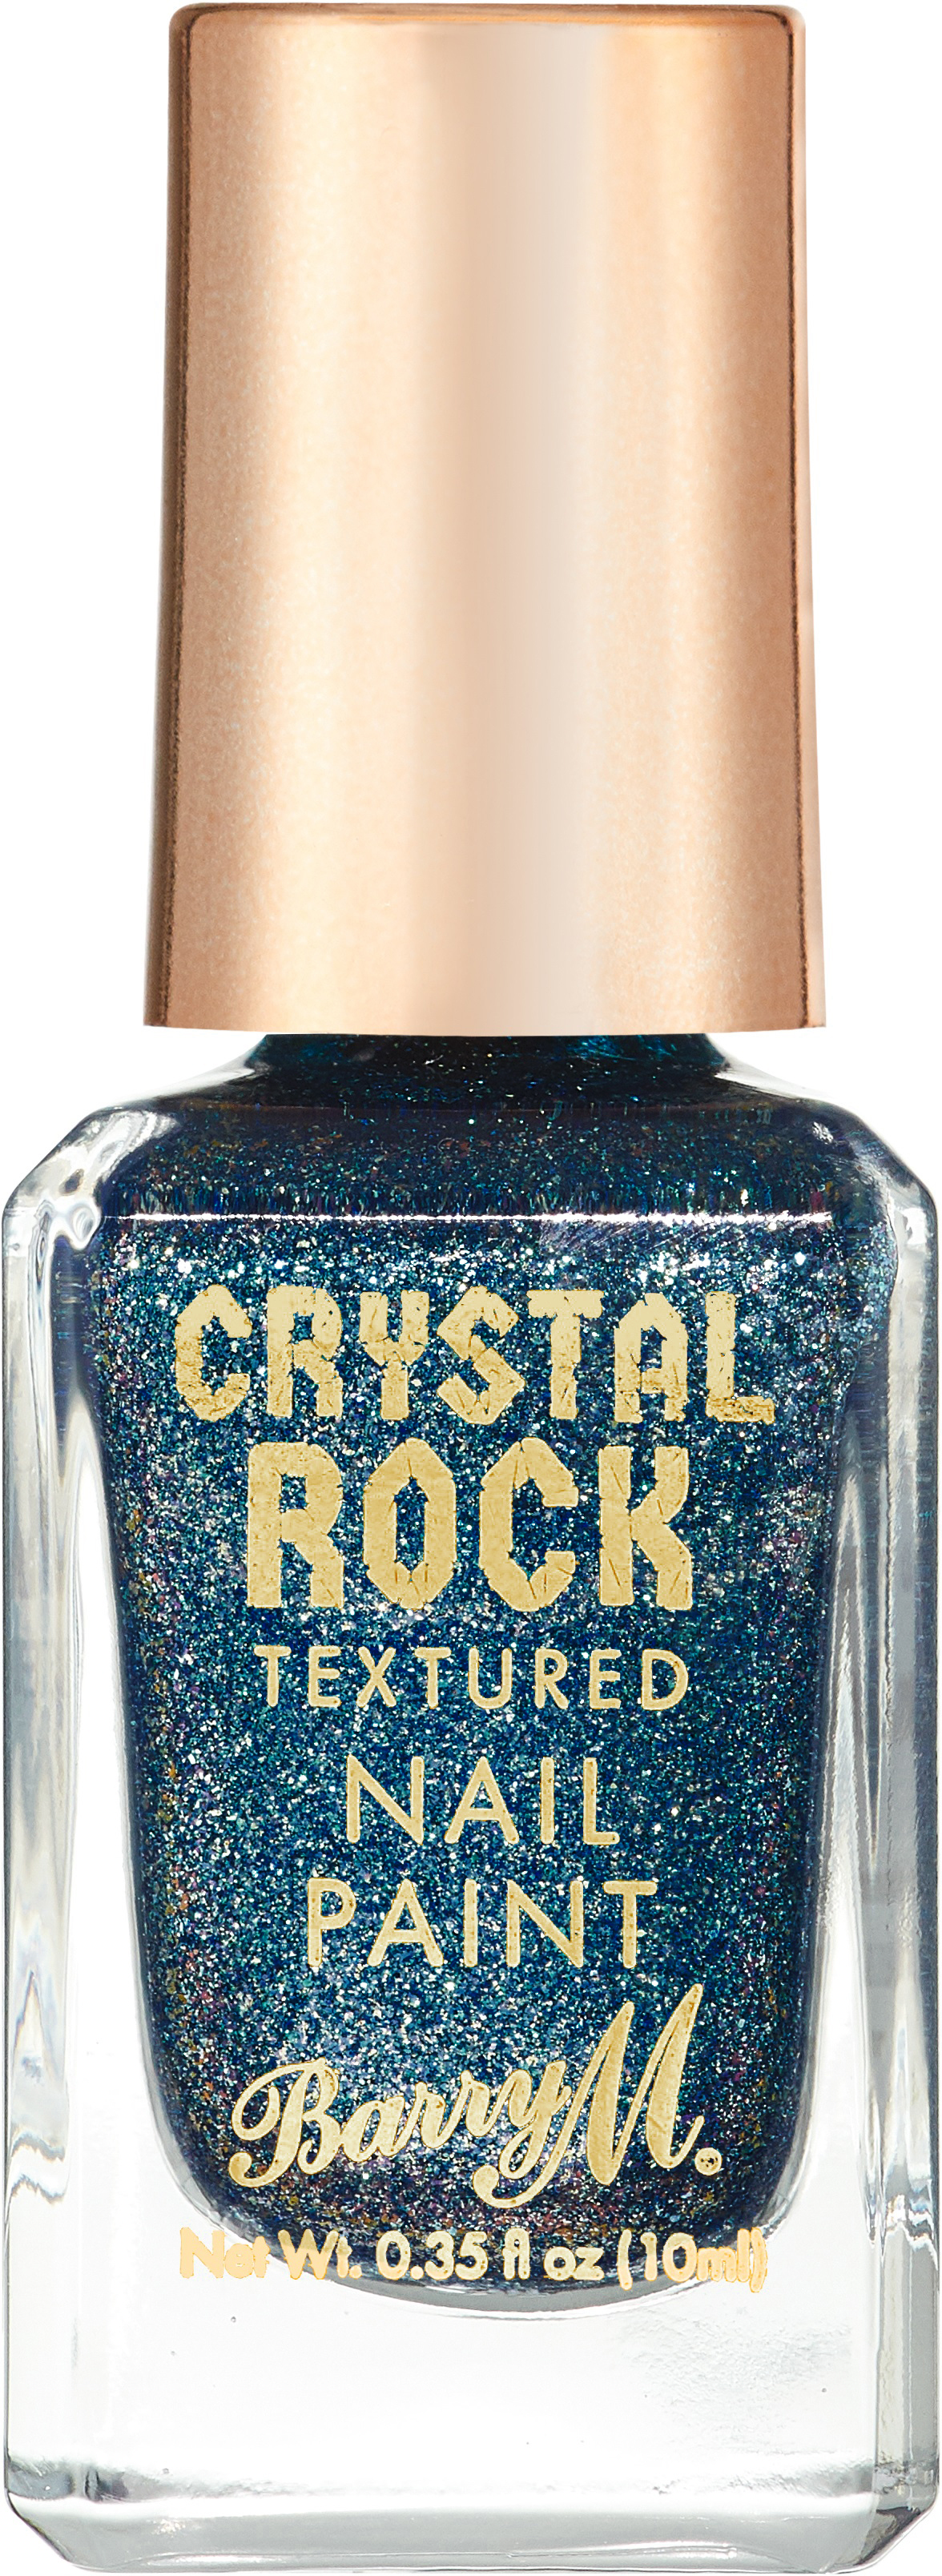 Barry M Crystal Rock Textured Nail Paint Fluorite